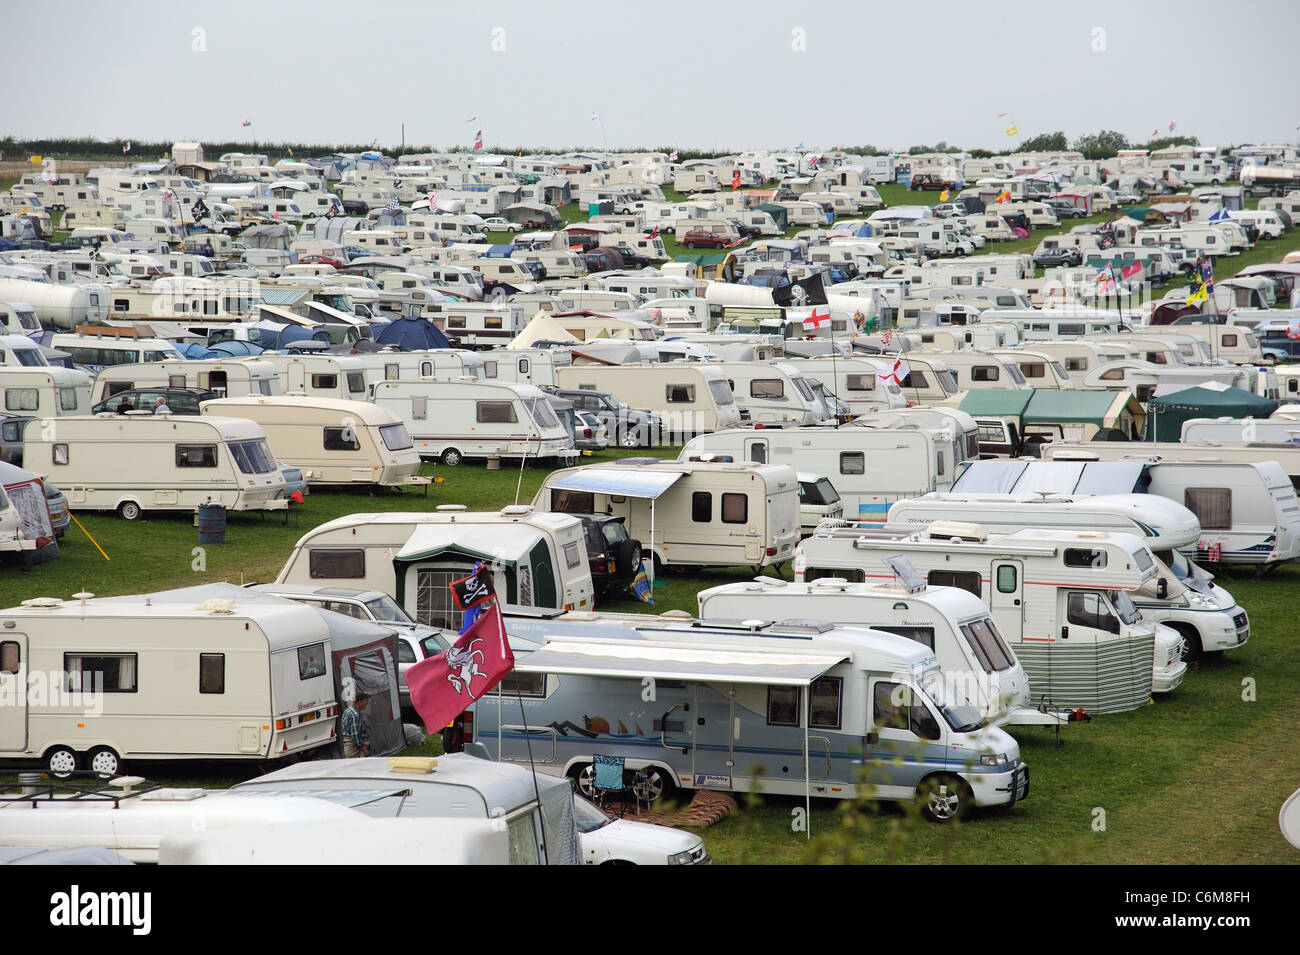 Caravan park for holidaymakers and visitors to Dorset Steam Fair held ...